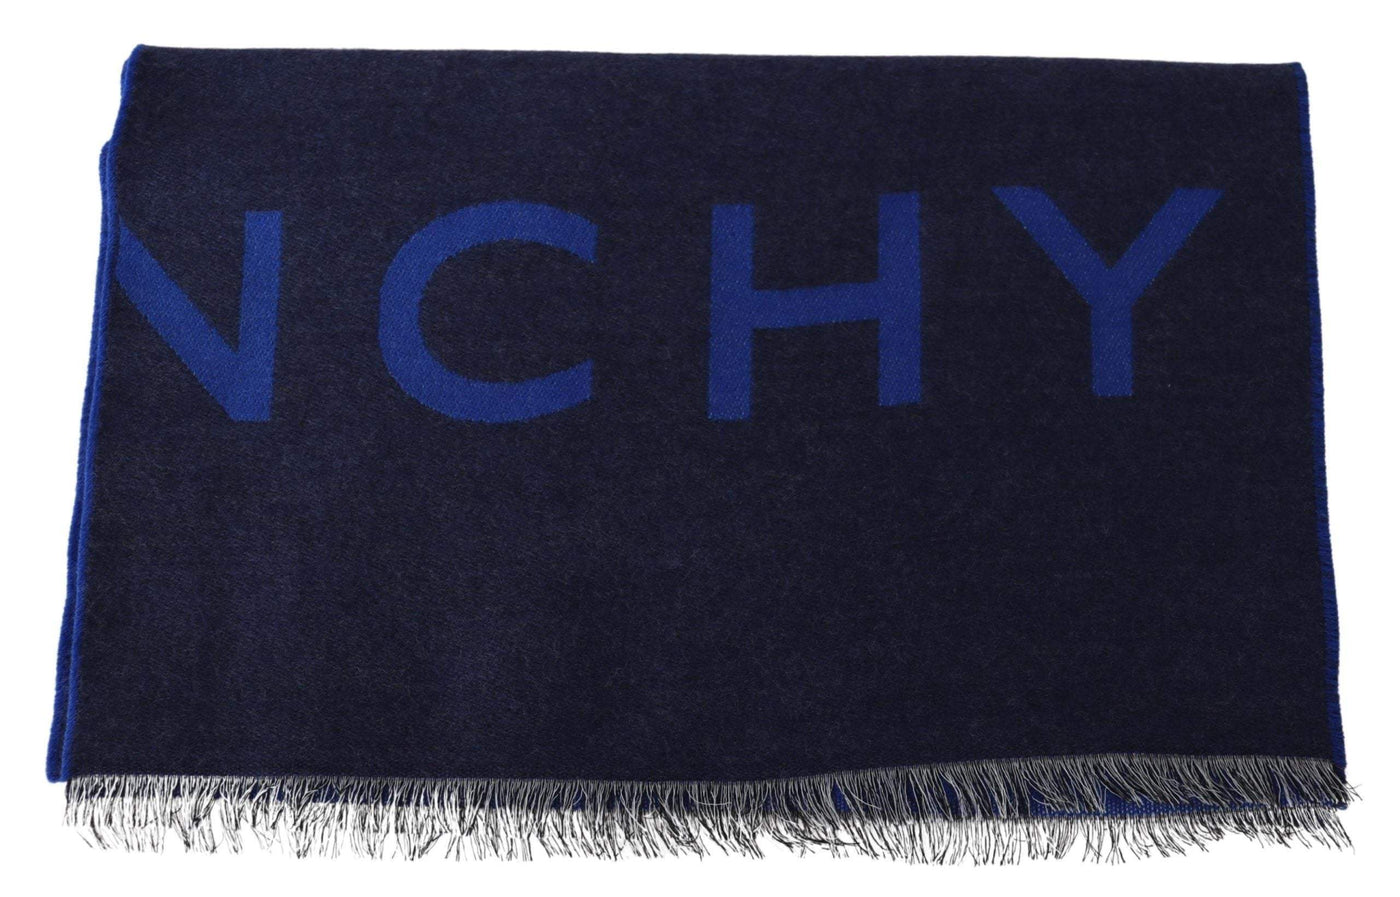 GIVENCHY Blue Wool Unisex Winter Warm  Scarf Wrap Shawl #women, Accessories - New Arrivals, Blue, feed-agegroup-adult, feed-color-blue, feed-gender-female, feed-size-58 cm|M, feed-size-OS, Gender_Women, GIVENCHY, Scarves - Men - Accessories, Scarves - Women - Accessories at SEYMAYKA